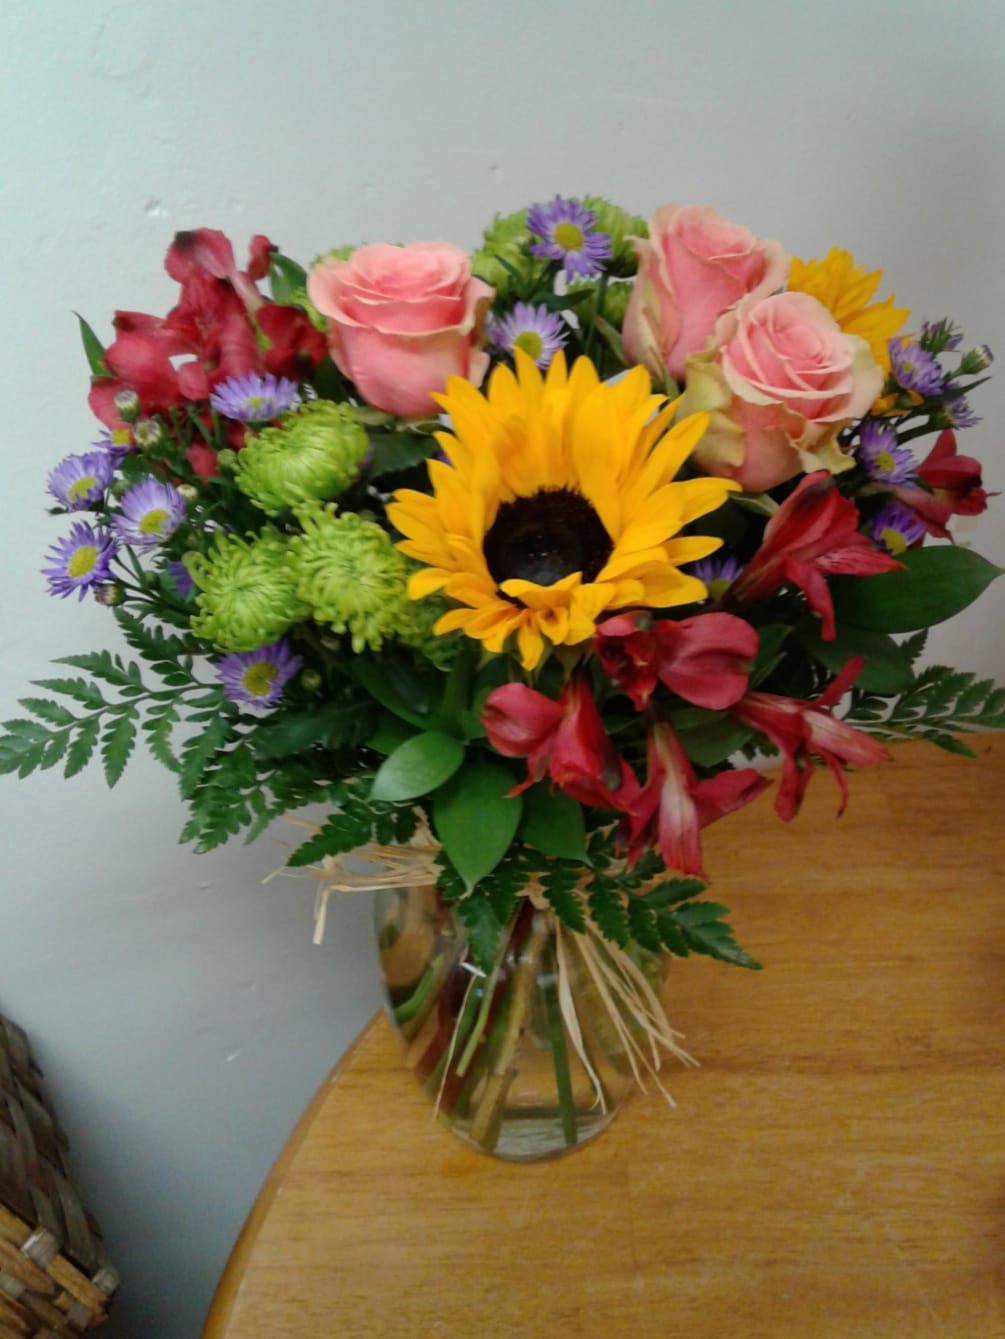 Sunflowers, Roses, Alstroemeria, Green Button Poms, and Lavender Monte Casino mingle together